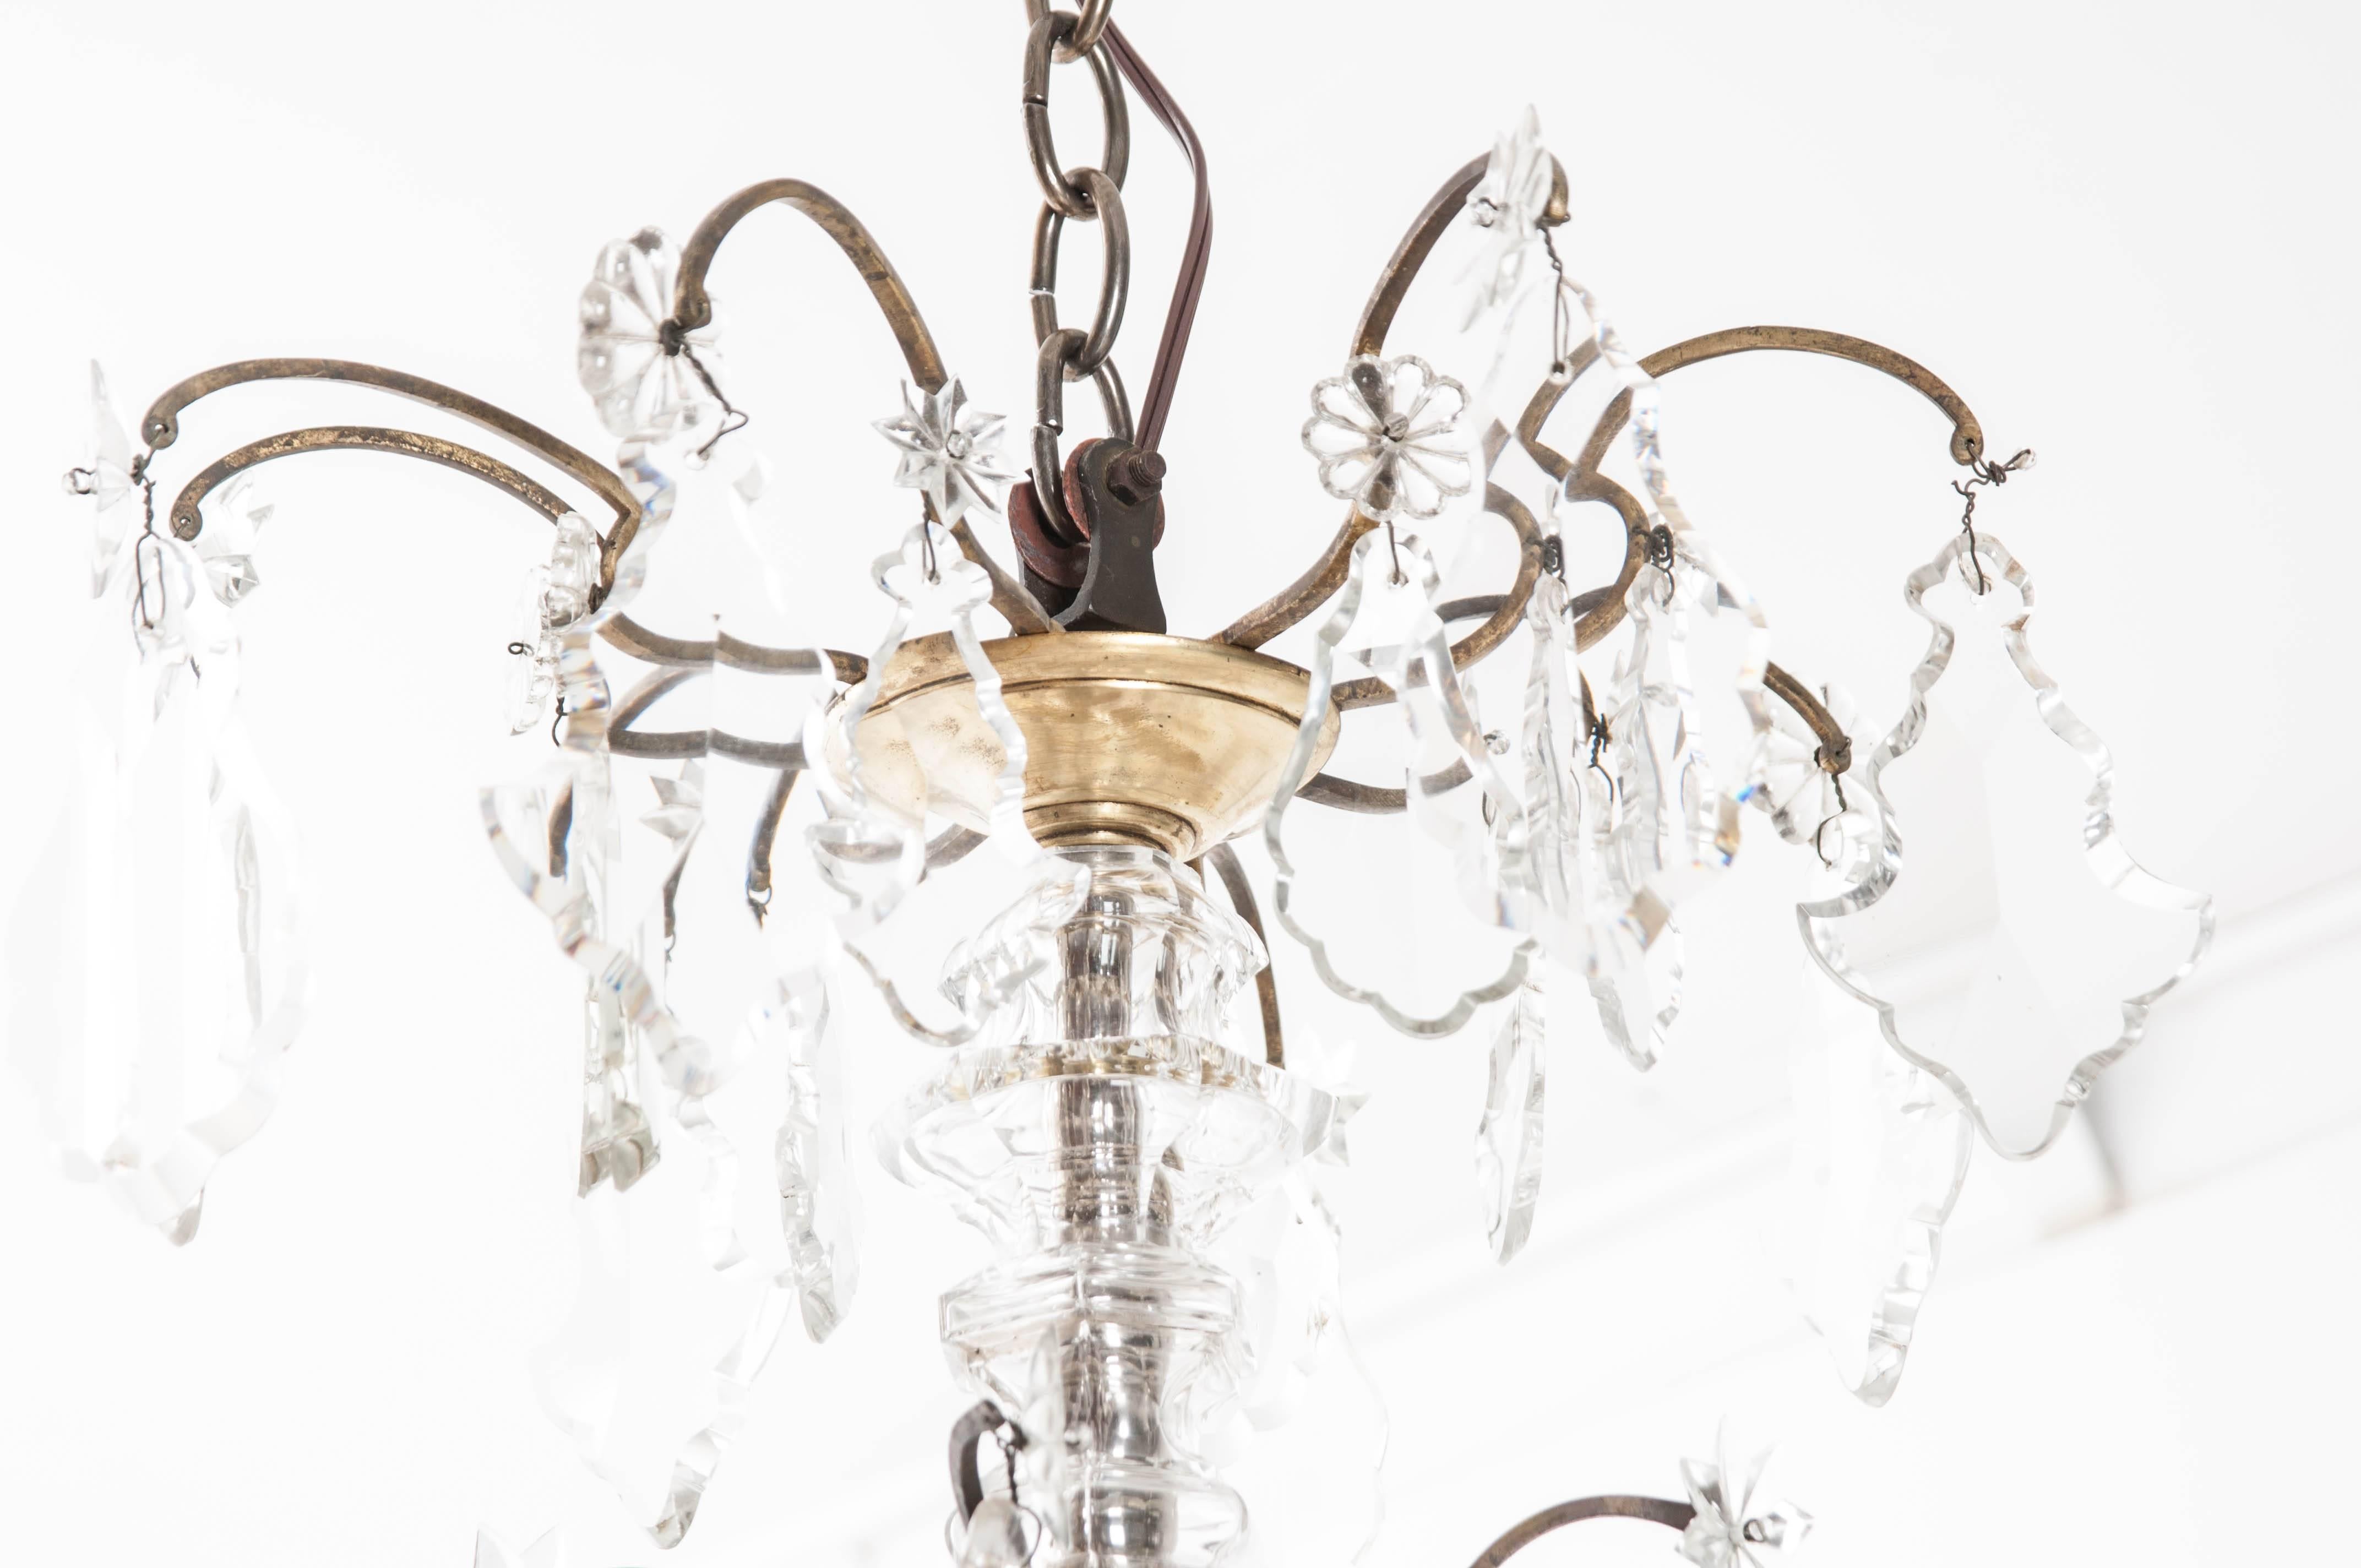 This exquisite French chandelier has 12 lights and is thoroughly adorned with beautiful drop pendant crystals. These are surmounted by crystal stars and rosettes intended to conceal the attachment point between crystal and metal frame. The birdcage